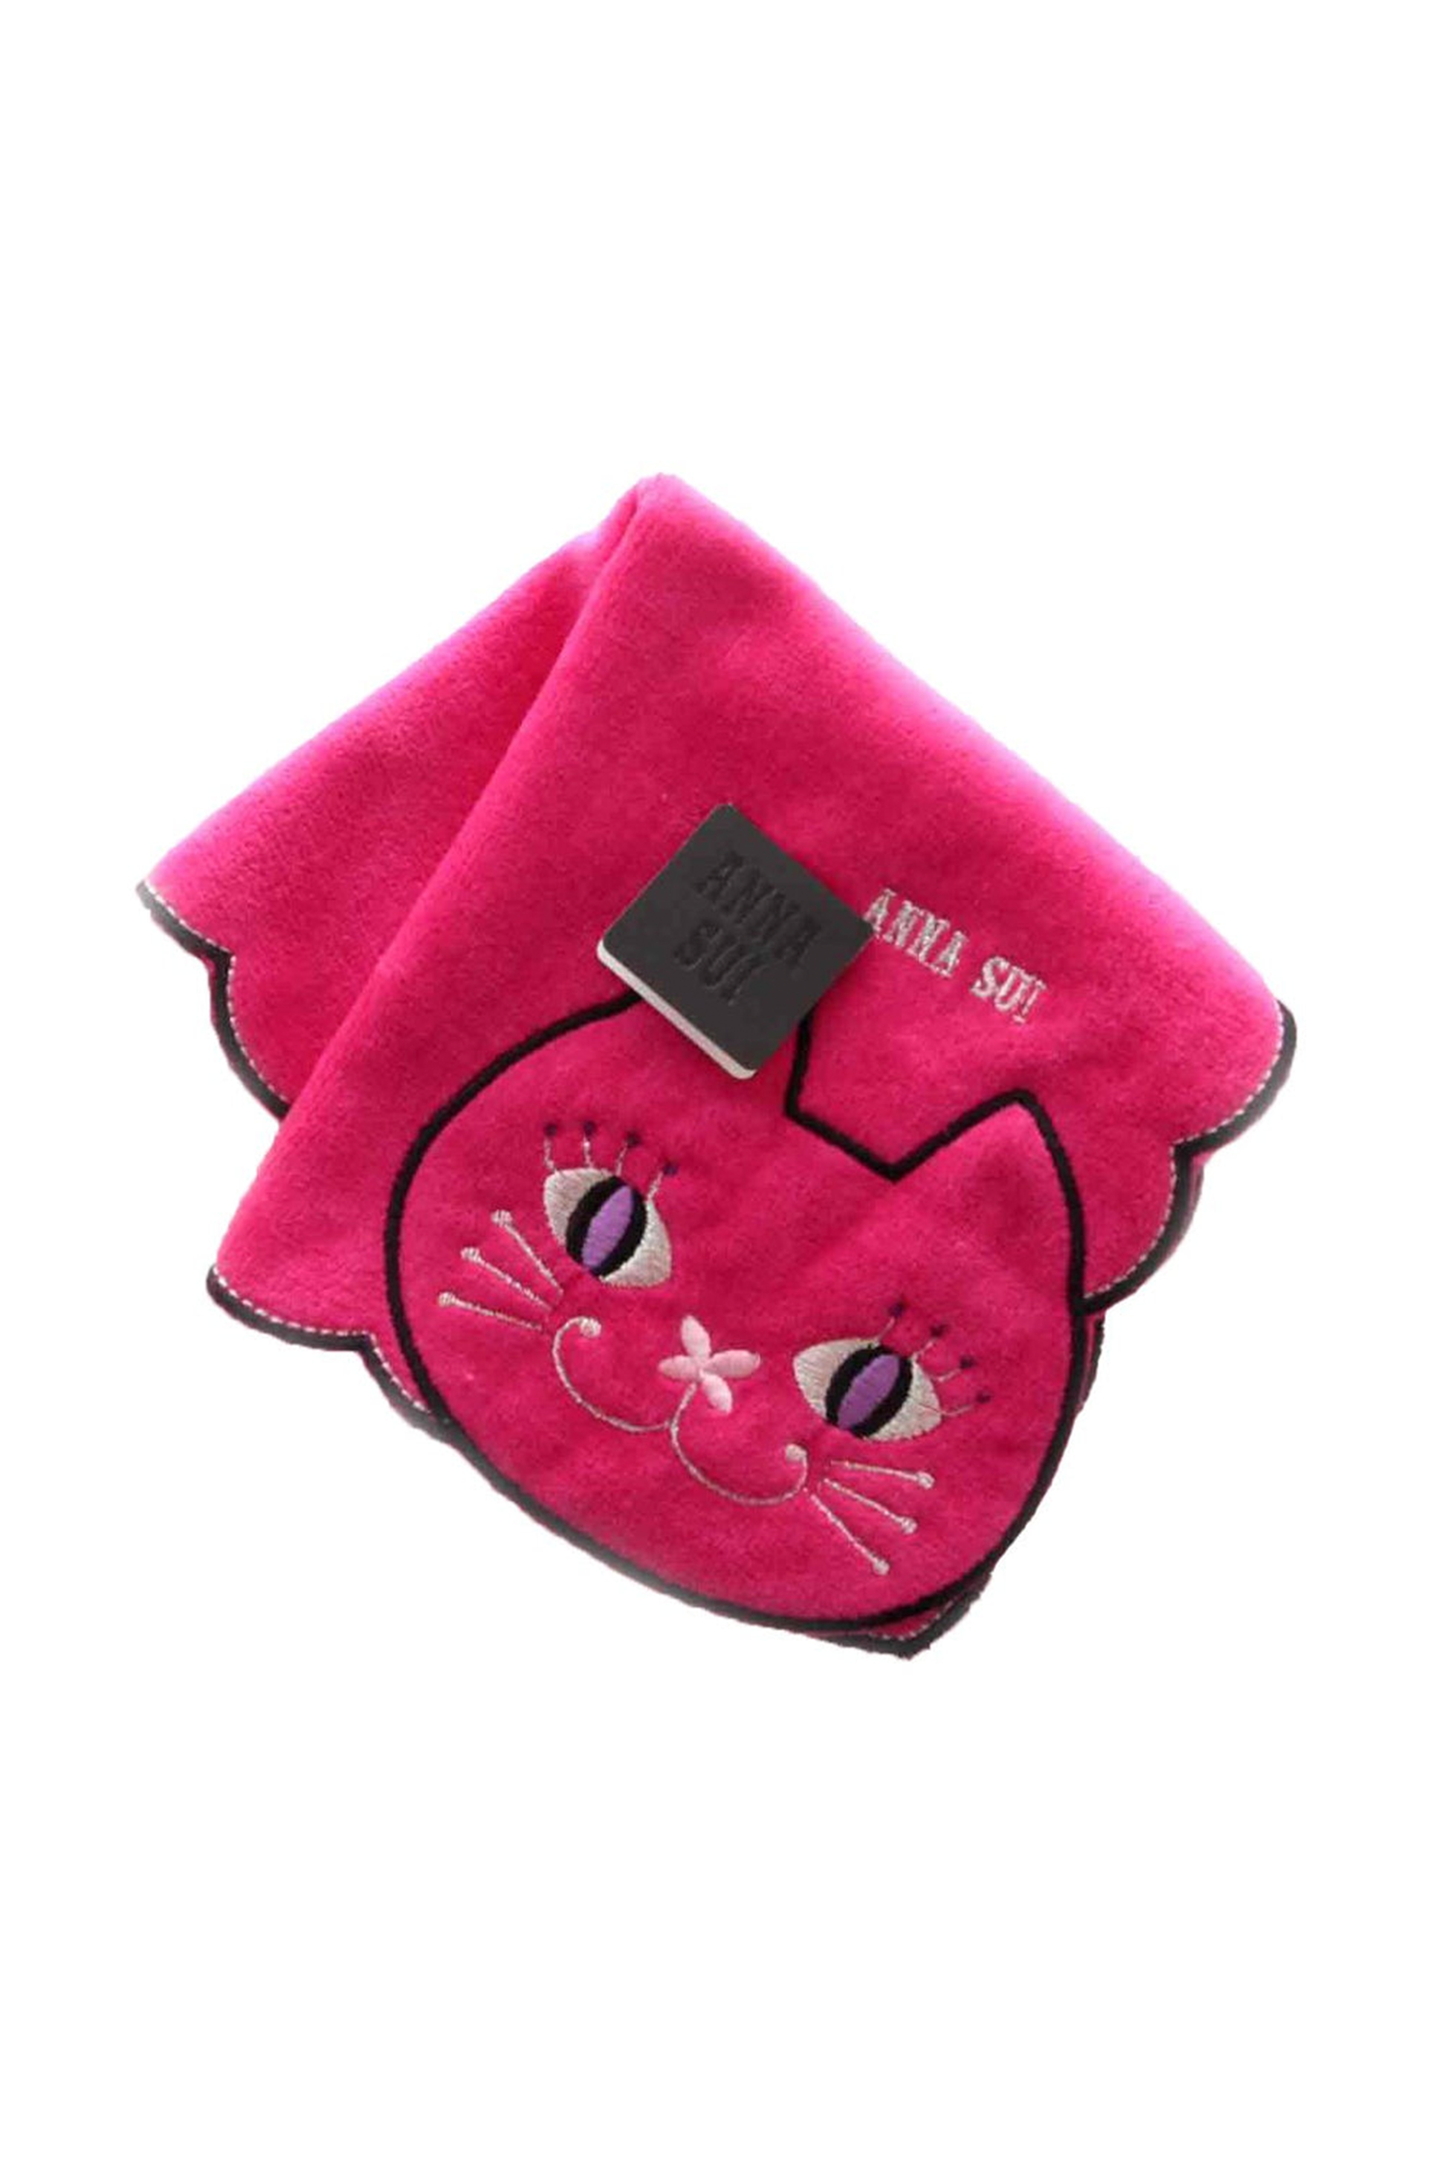 Red washcloth, wavy hems, cat with black borders, pink eyes, pink nose, Anna Sui in a grey tag